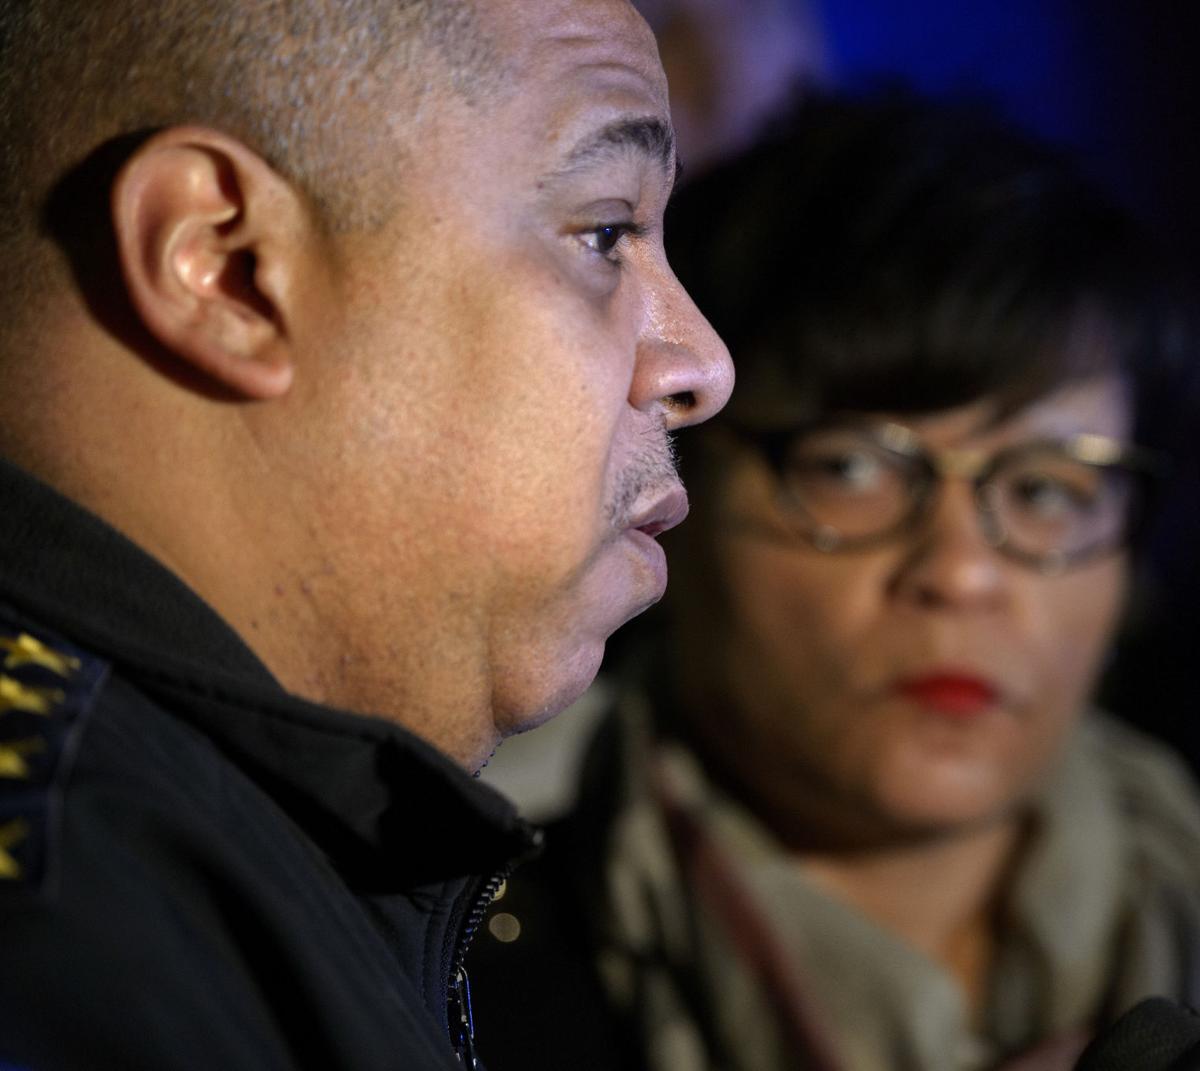 New Orleans police chief Michael Harrison hired in Baltimore, to depart